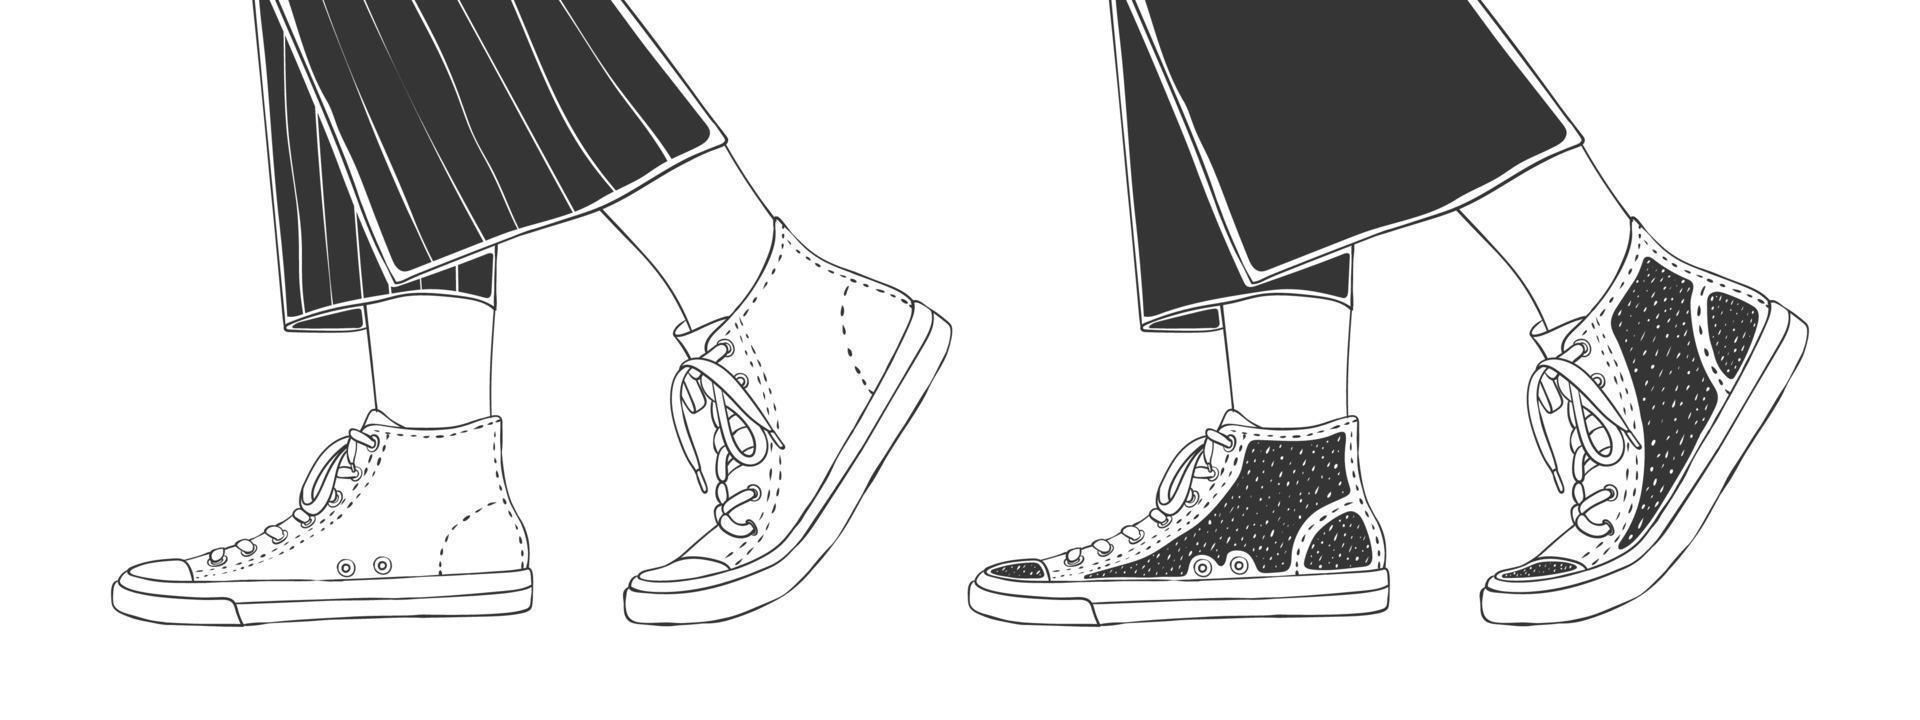 Legs shod sneakers. Fashion footwear. Hand-drawn style shoes. Vector image